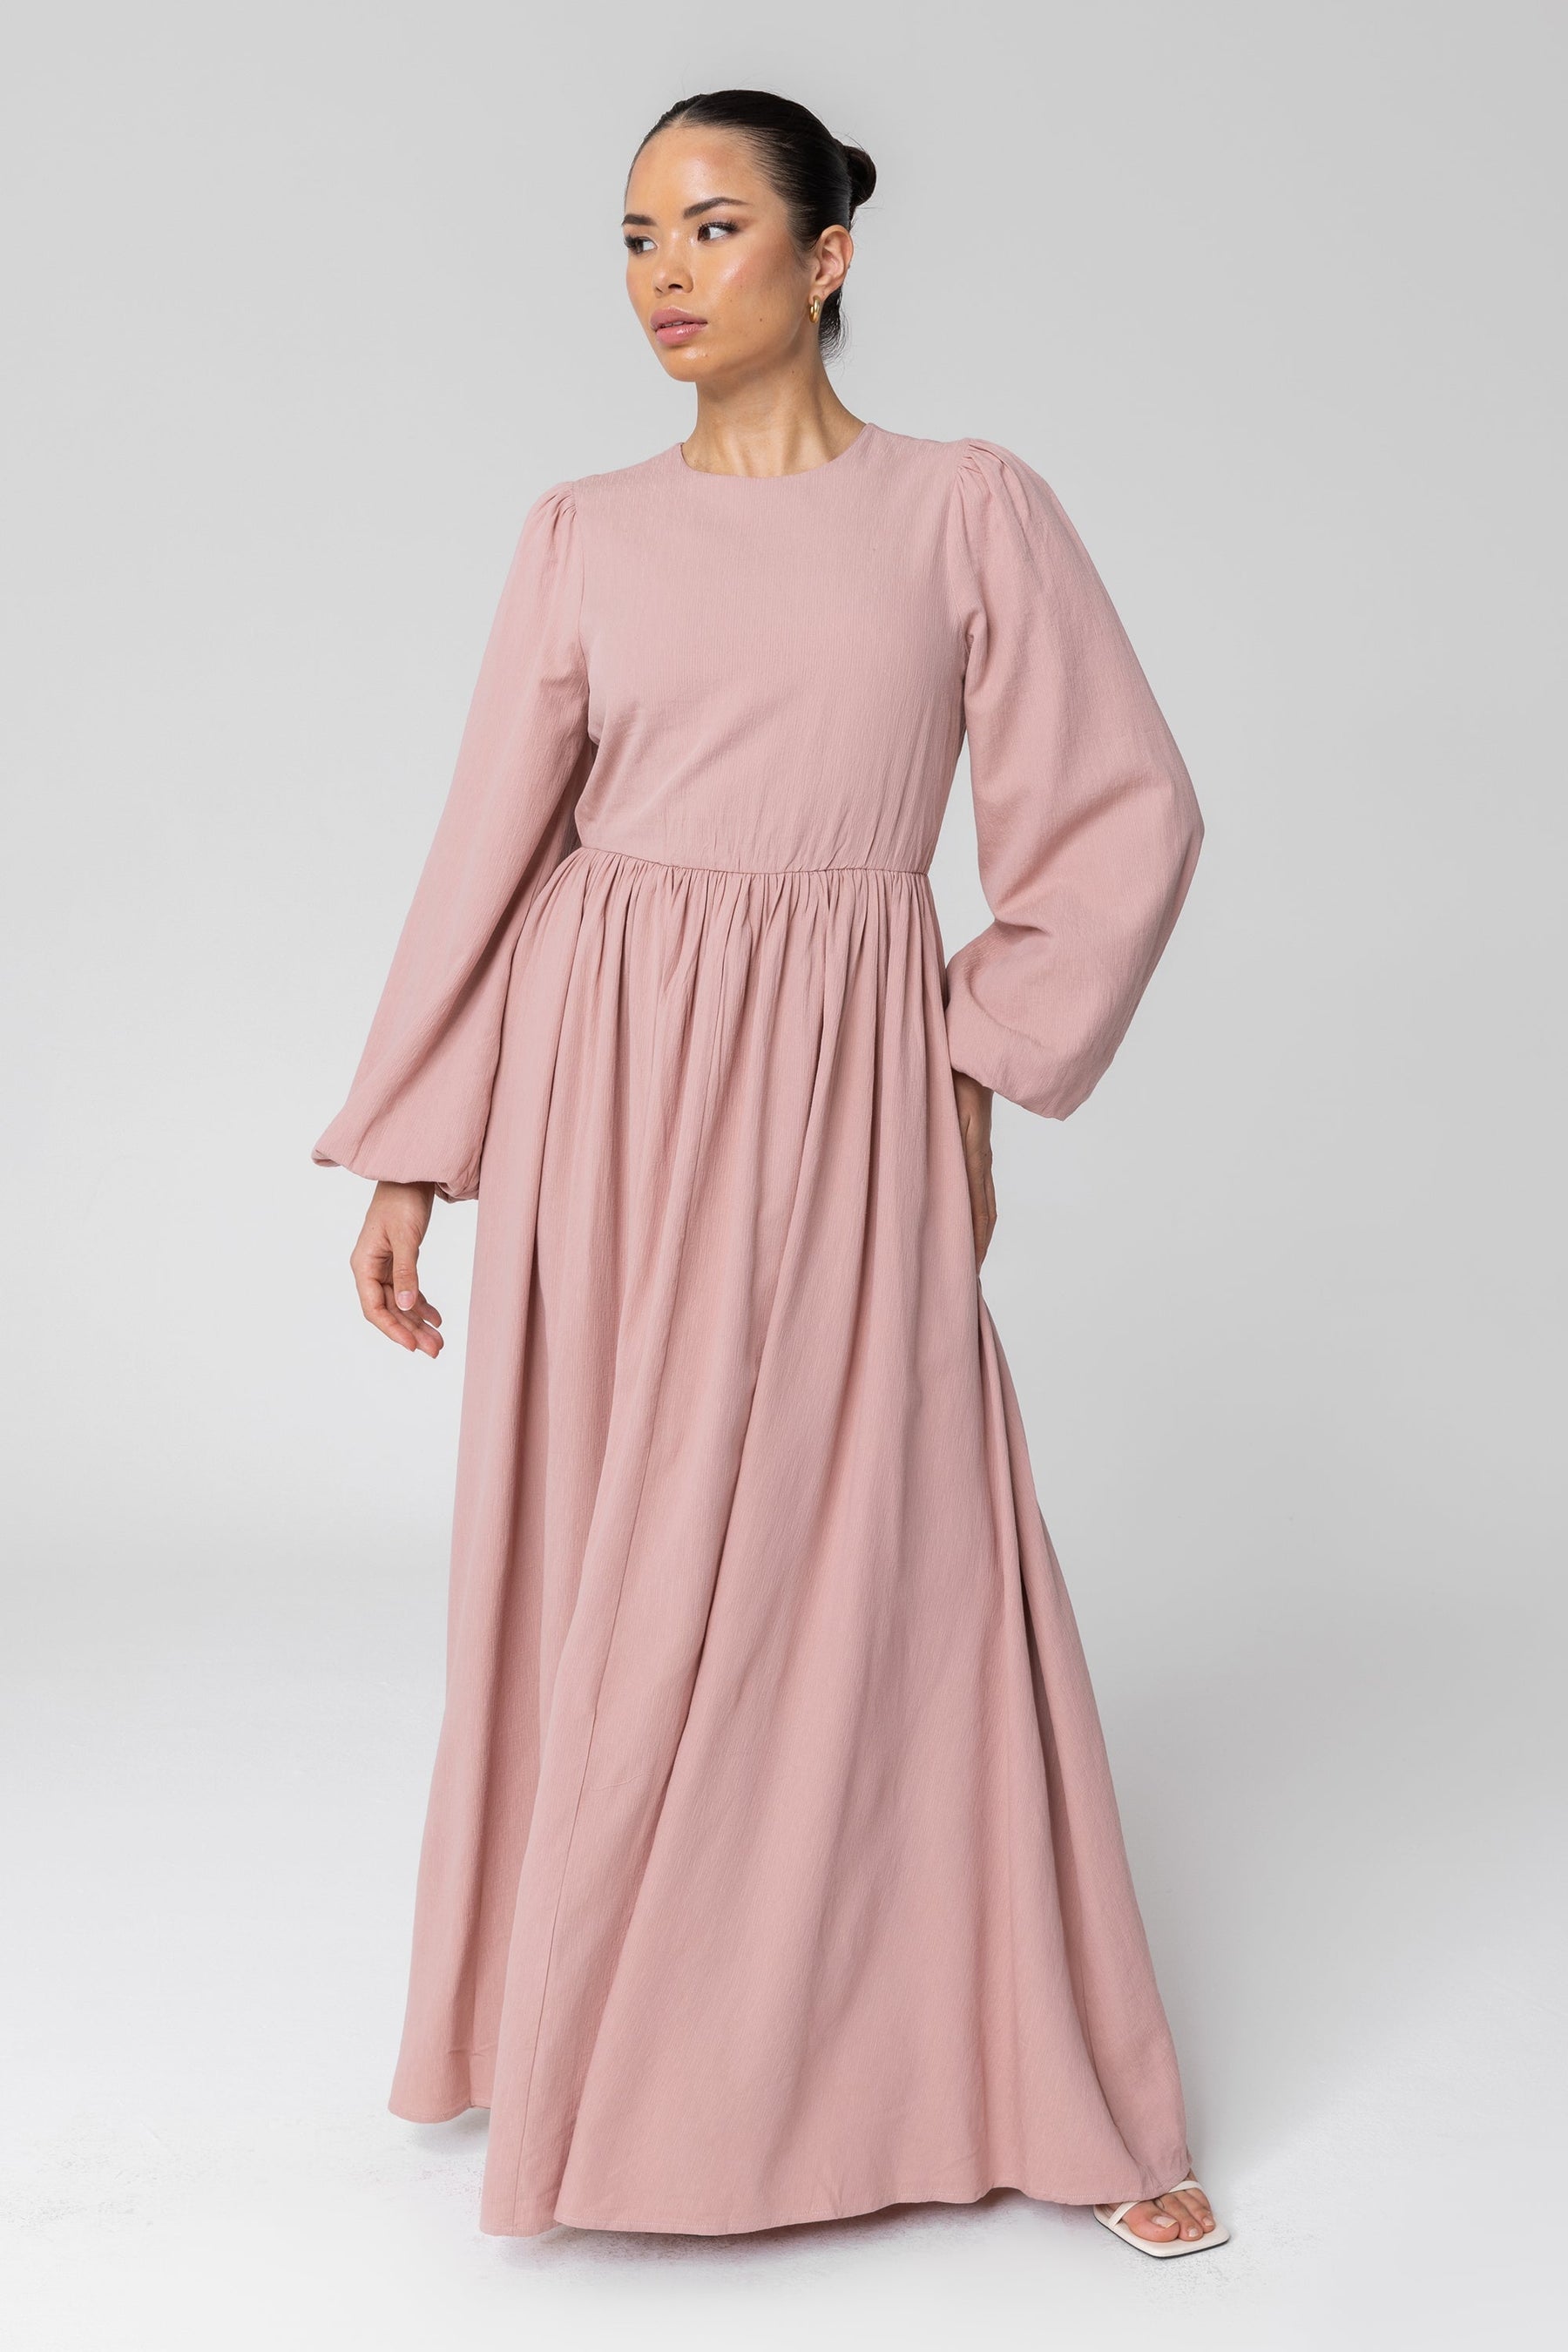 Rola Flowy A-Line Maxi Dress - Dusty Pink Veiled Collection 